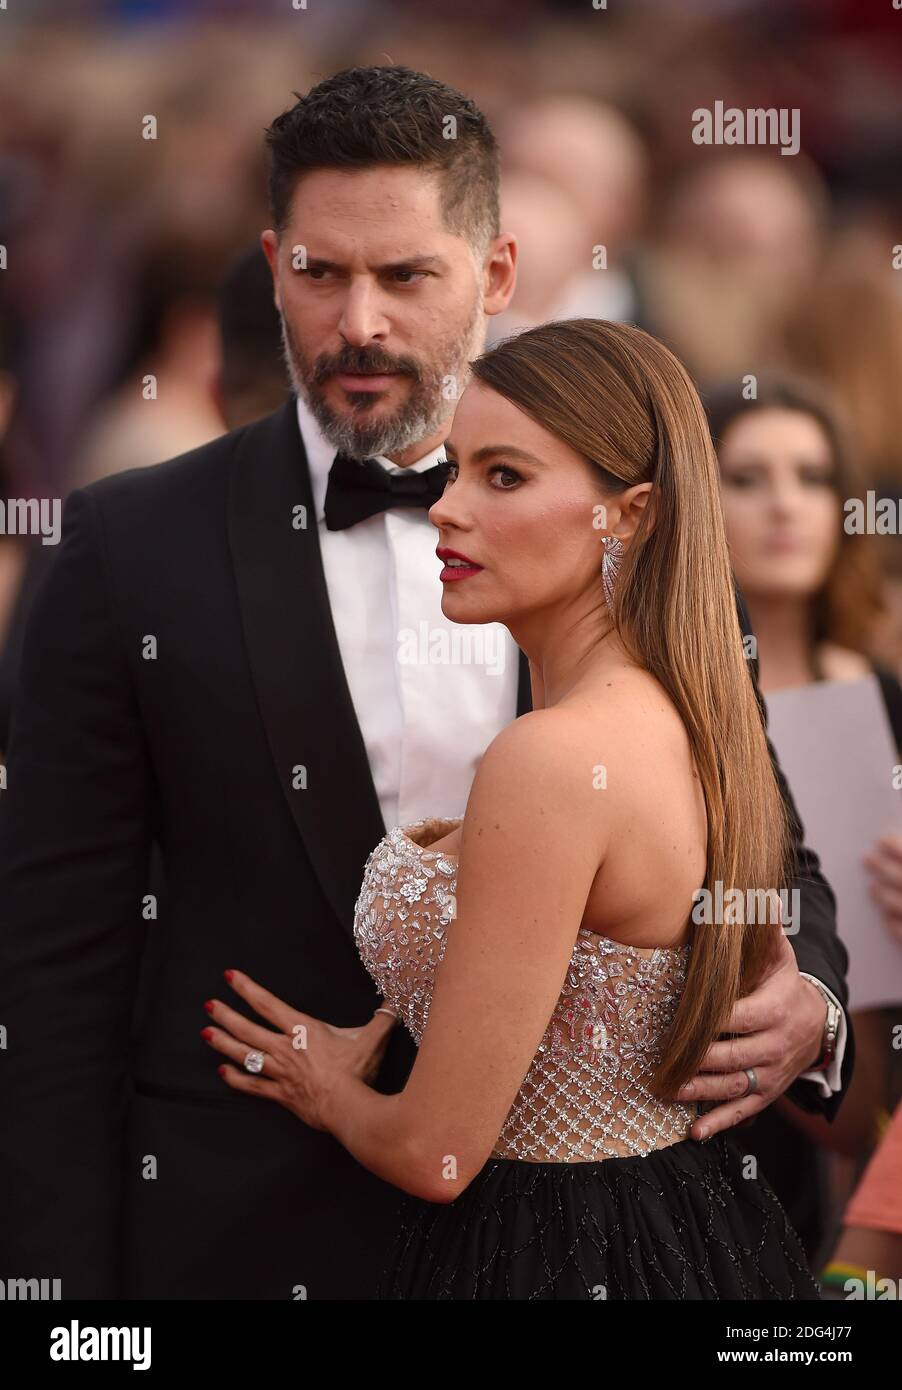 Joe Manganiello and Sofía Vergara attend the 23rd Annual Screen Actors Guild Awards held at the Shrine Auditorium in Los Angeles, CA, USA, on January 29, 2017. Photo by Lionel Hahn/ABACAPRESS.COM Stock Photo